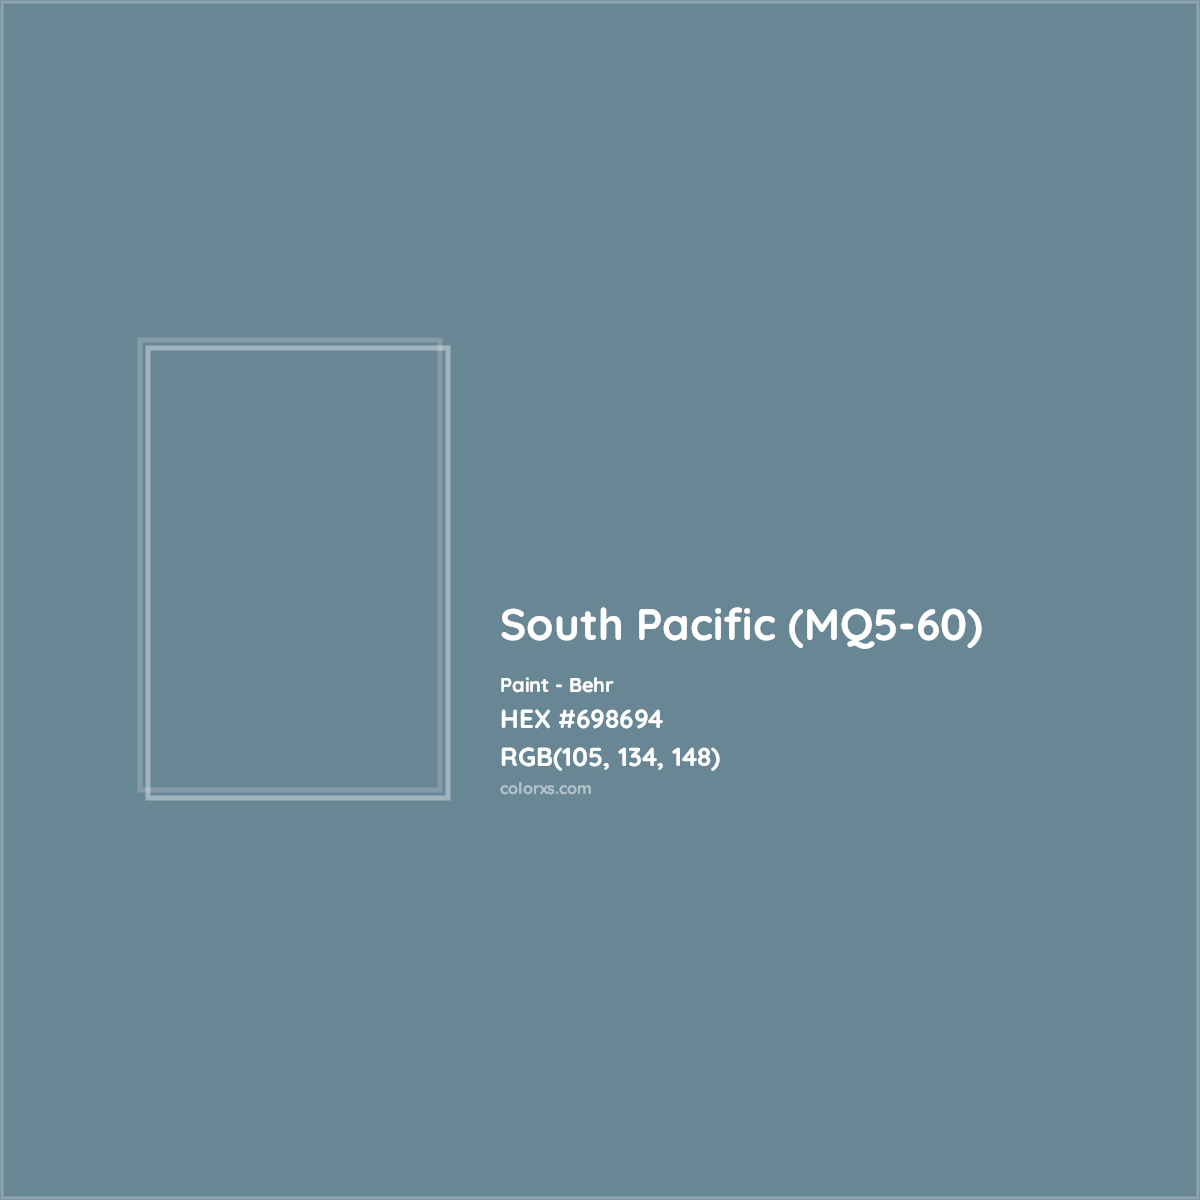 HEX #698694 South Pacific (MQ5-60) Paint Behr - Color Code